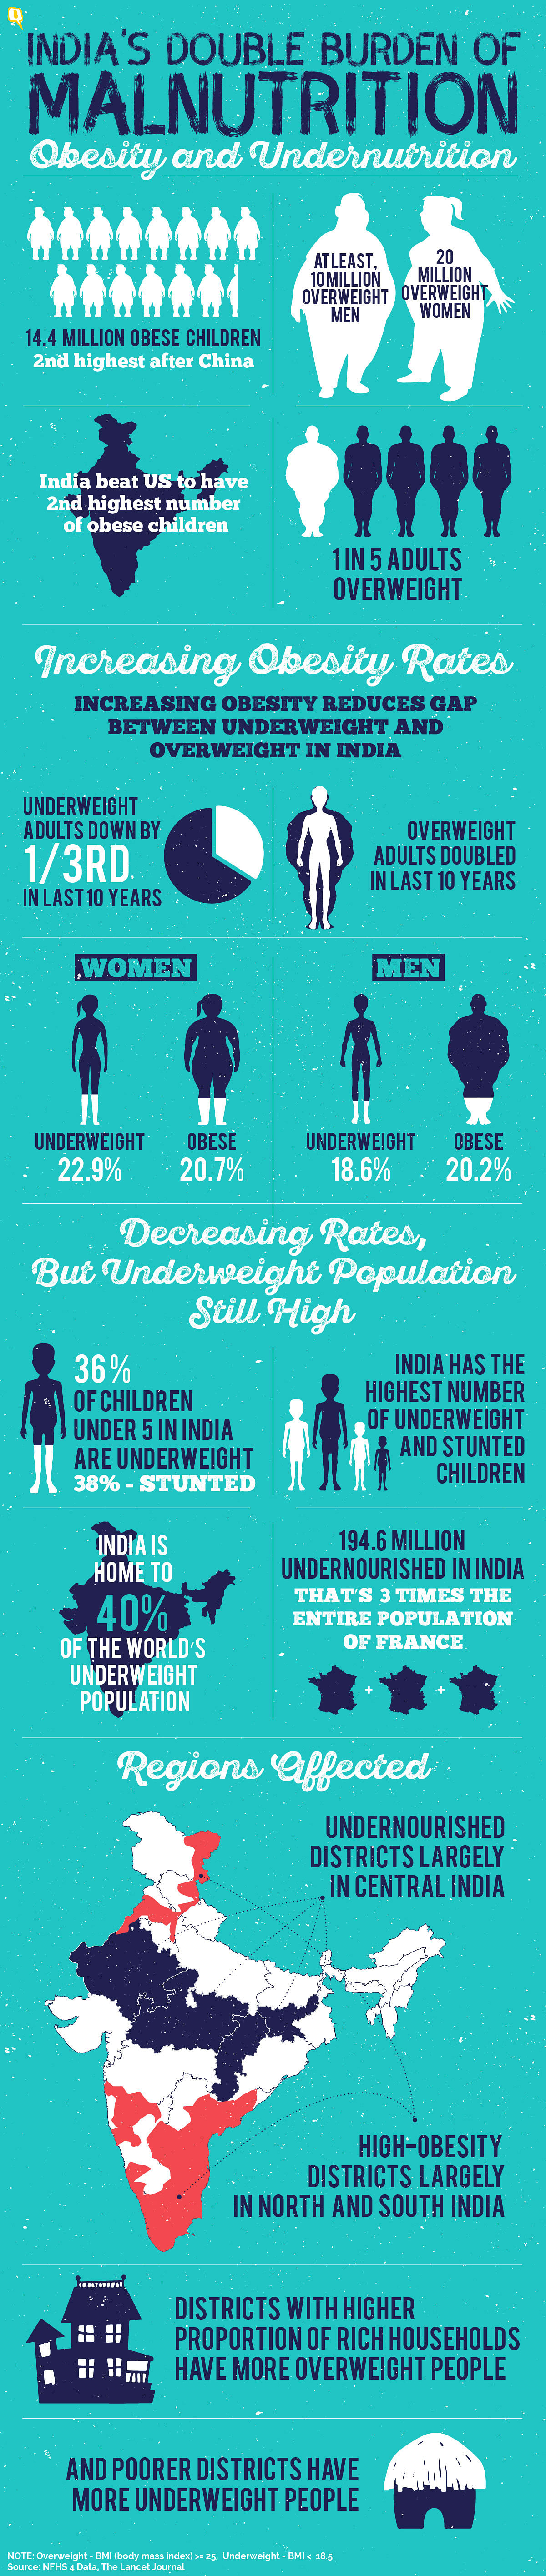 Obesity and undernutrition – the two extremes of malnutrition have become almost equally prevalent in India.